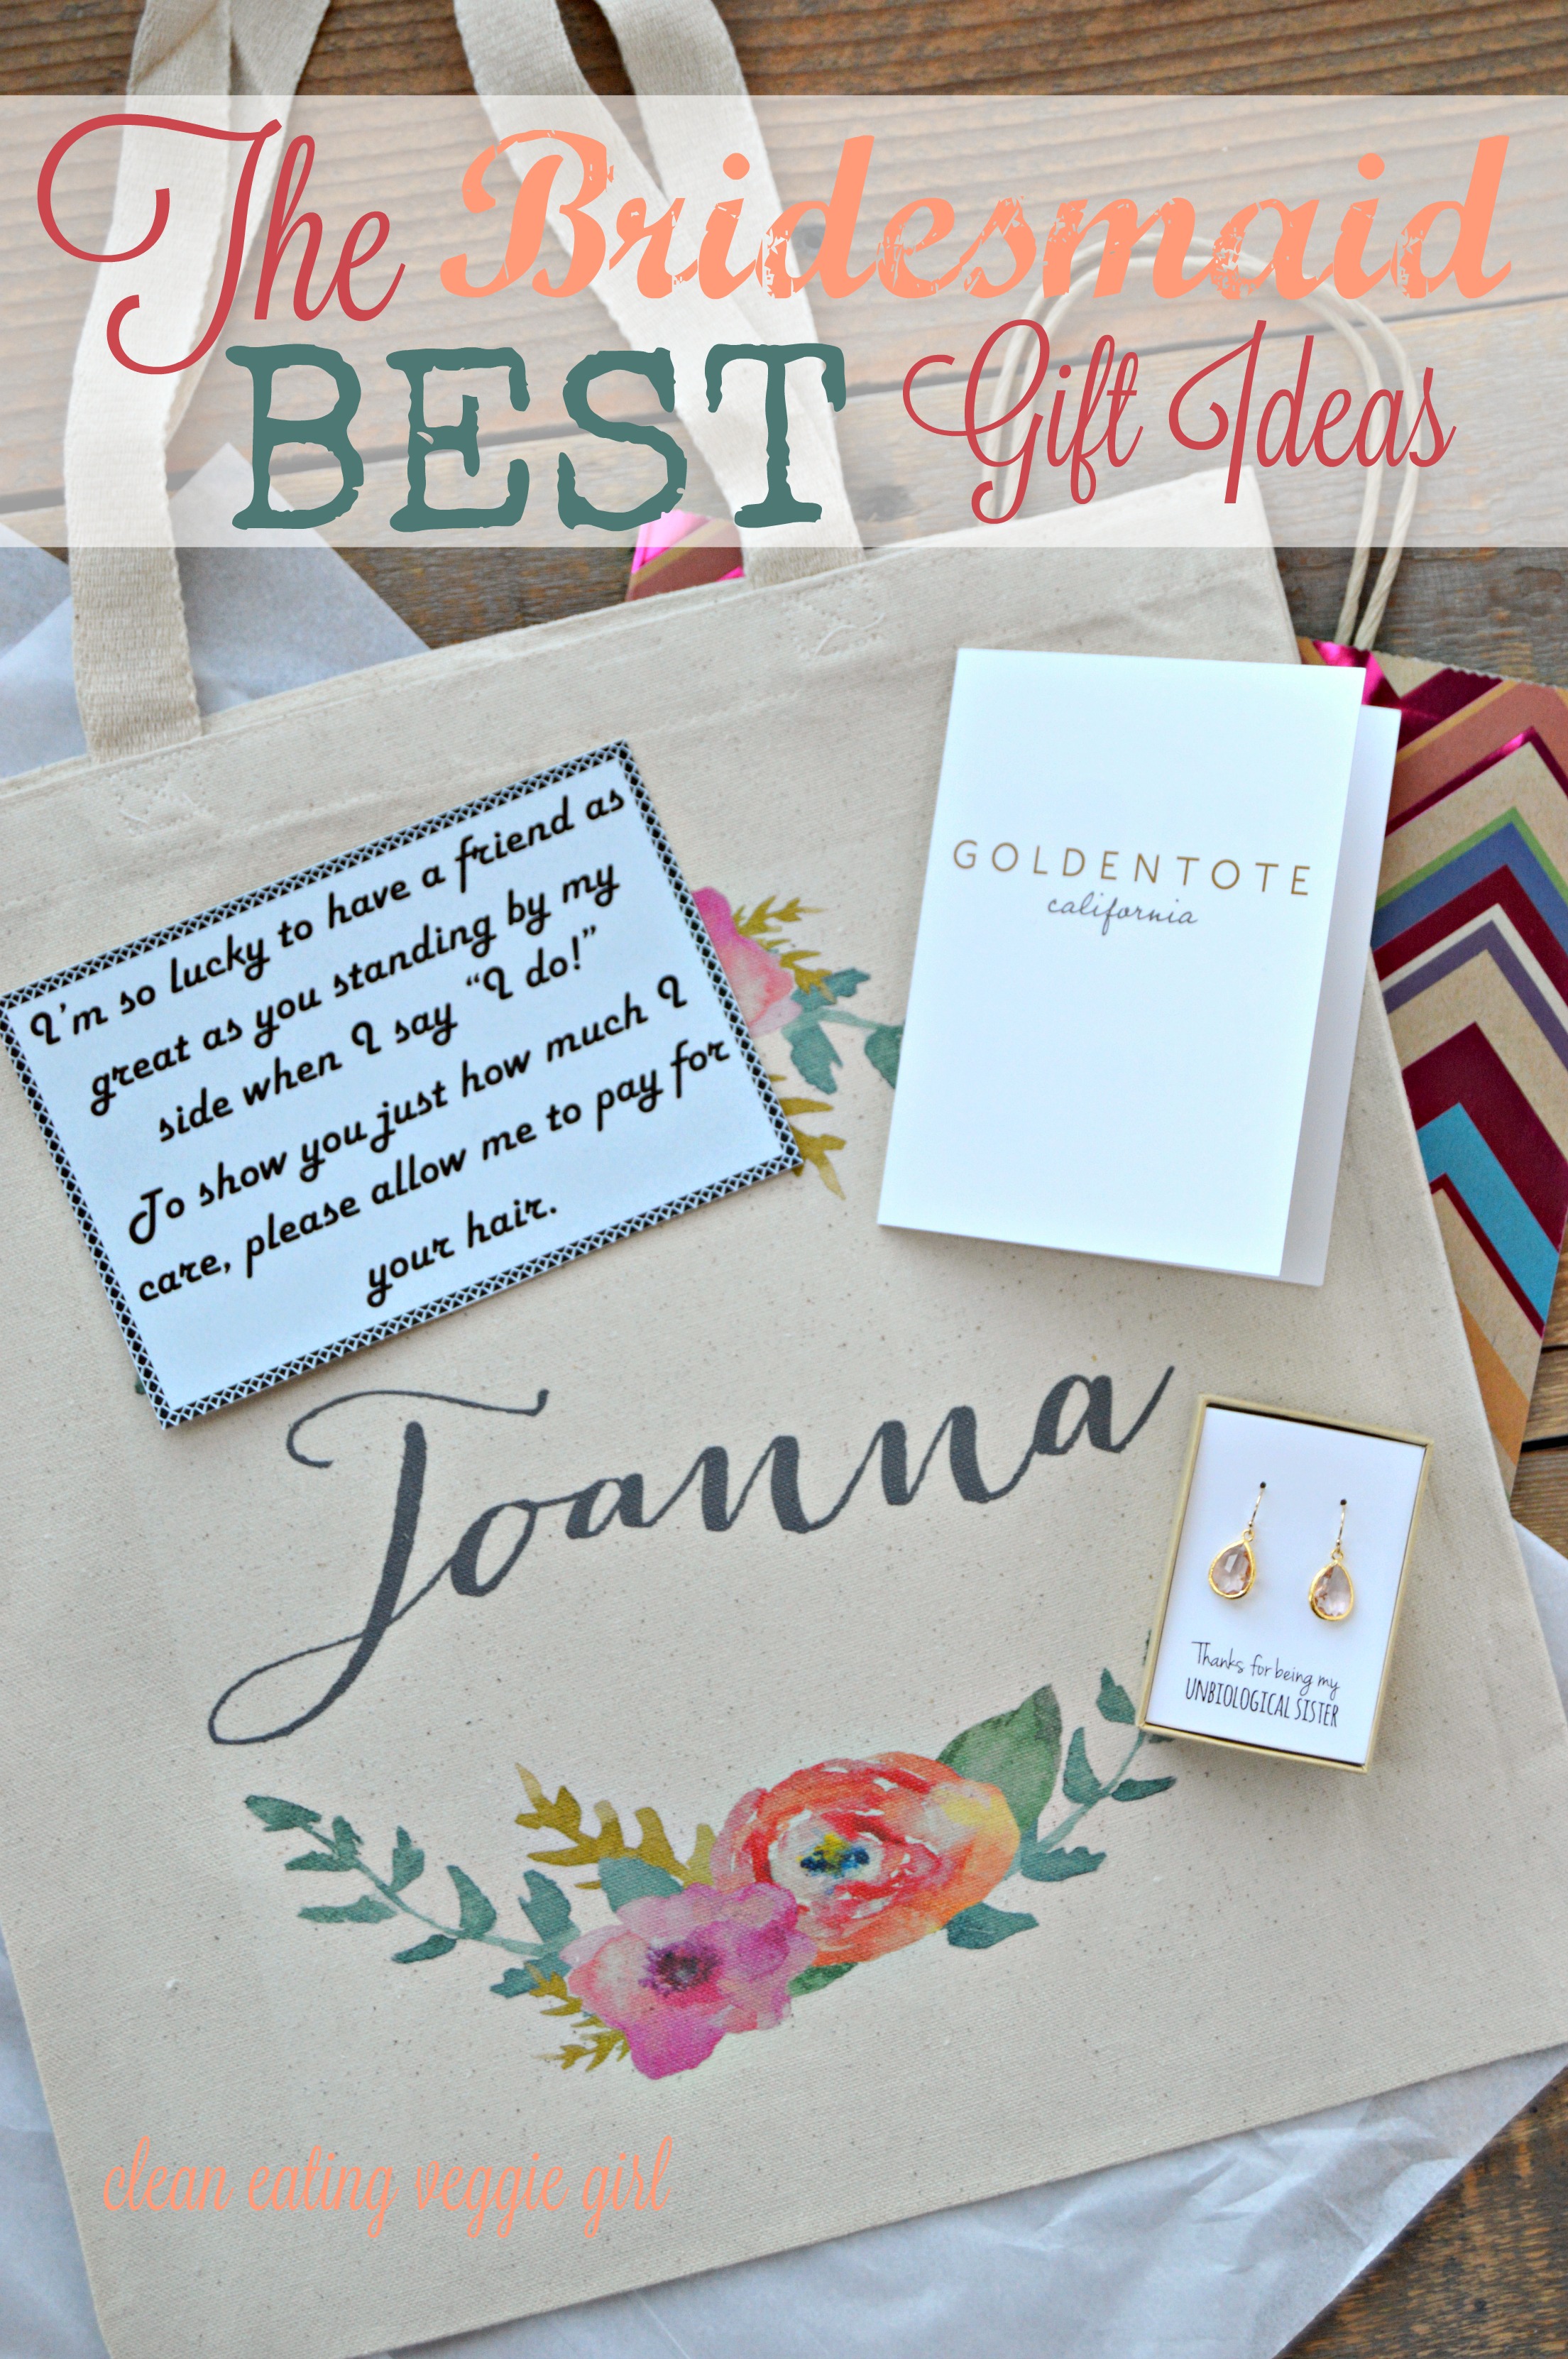 the best bridesmaid gift ideas featuring golden tote - clean eating